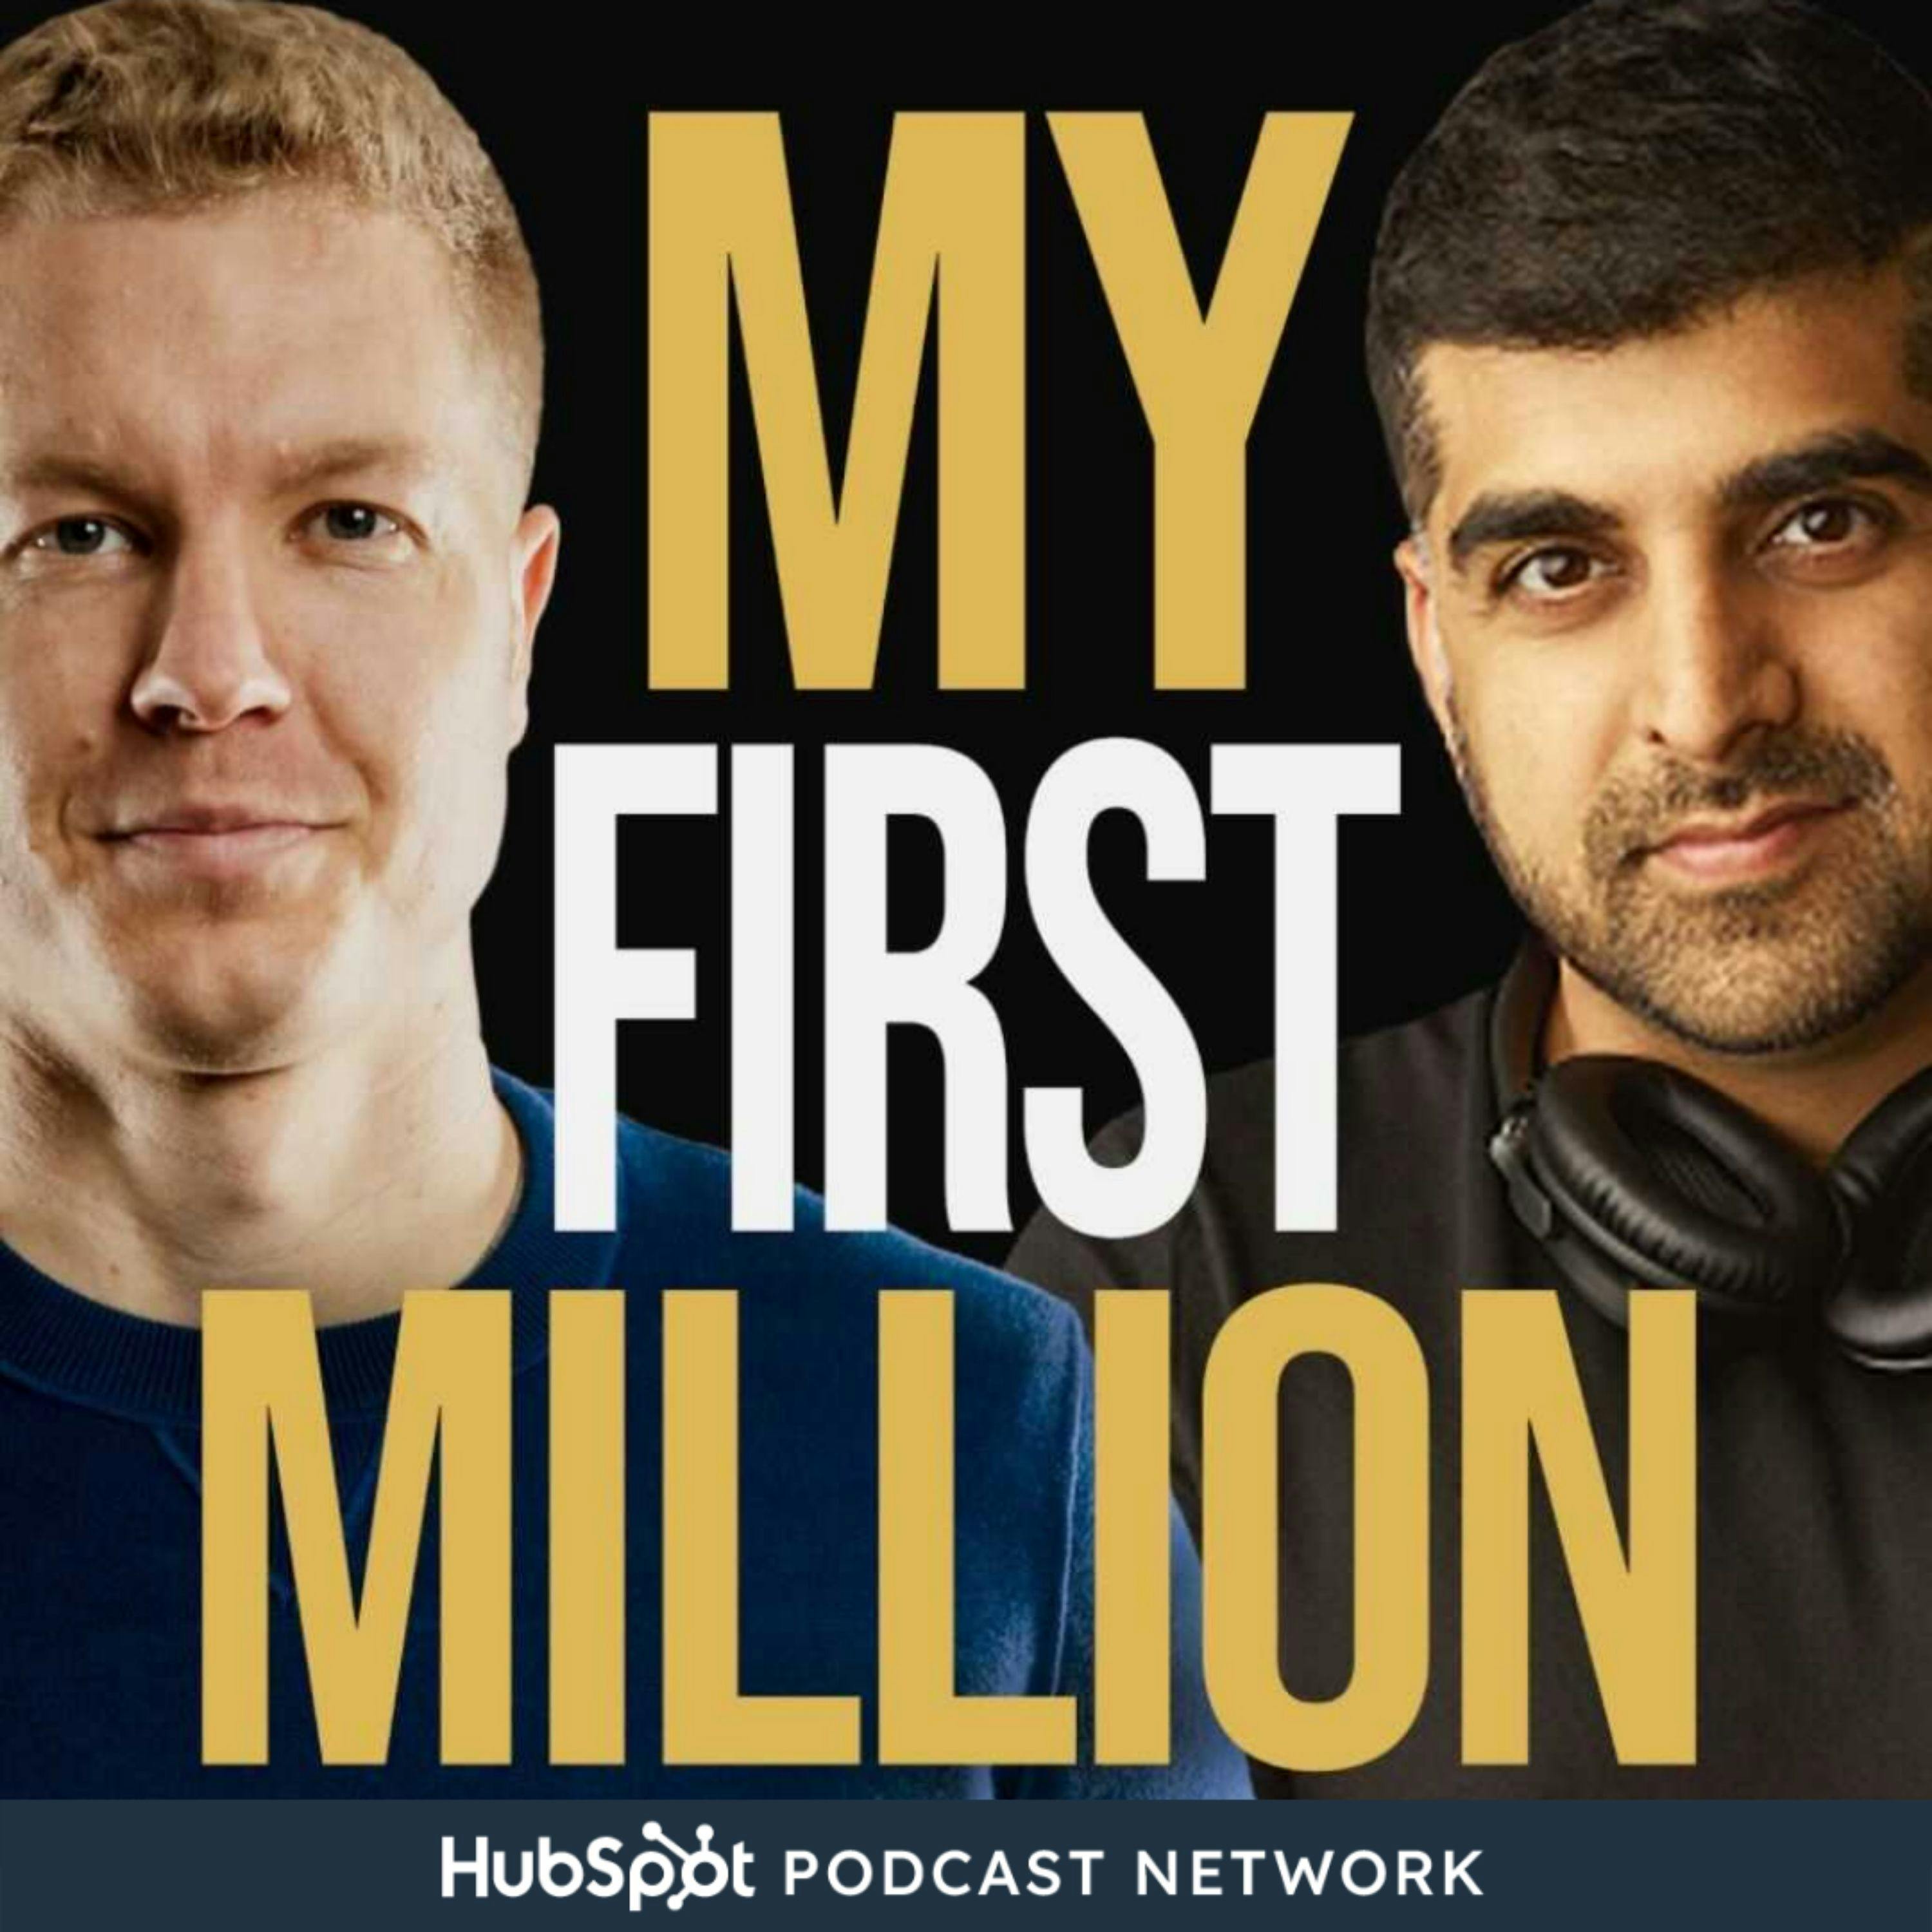 David Senra: Podcasts With Billion-Dollar Potential, What Separates Good From Great, and More